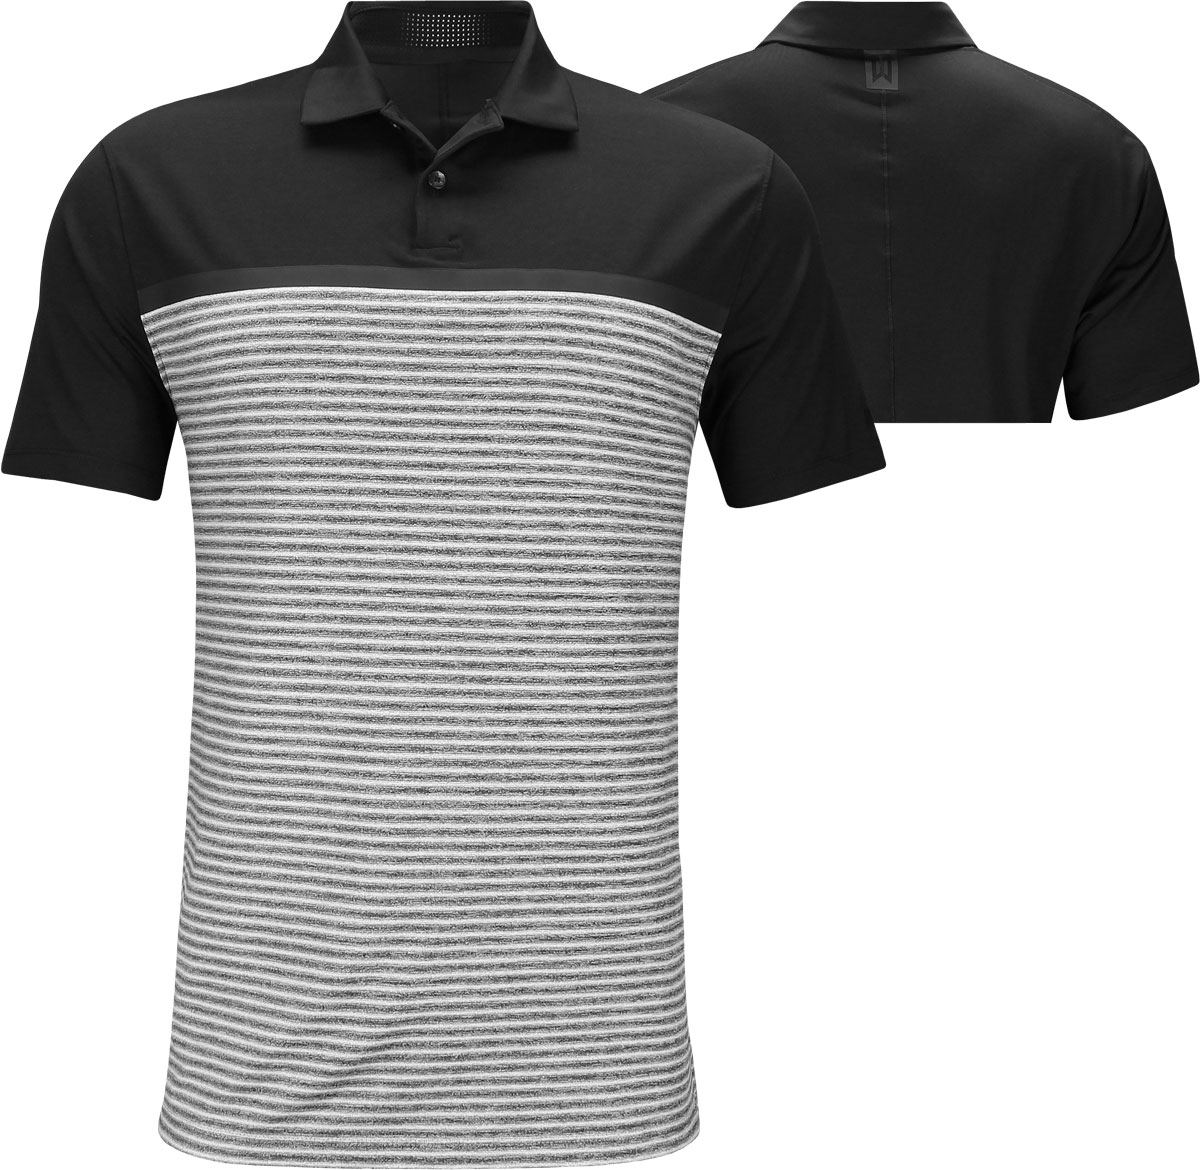 tiger woods polo nike 